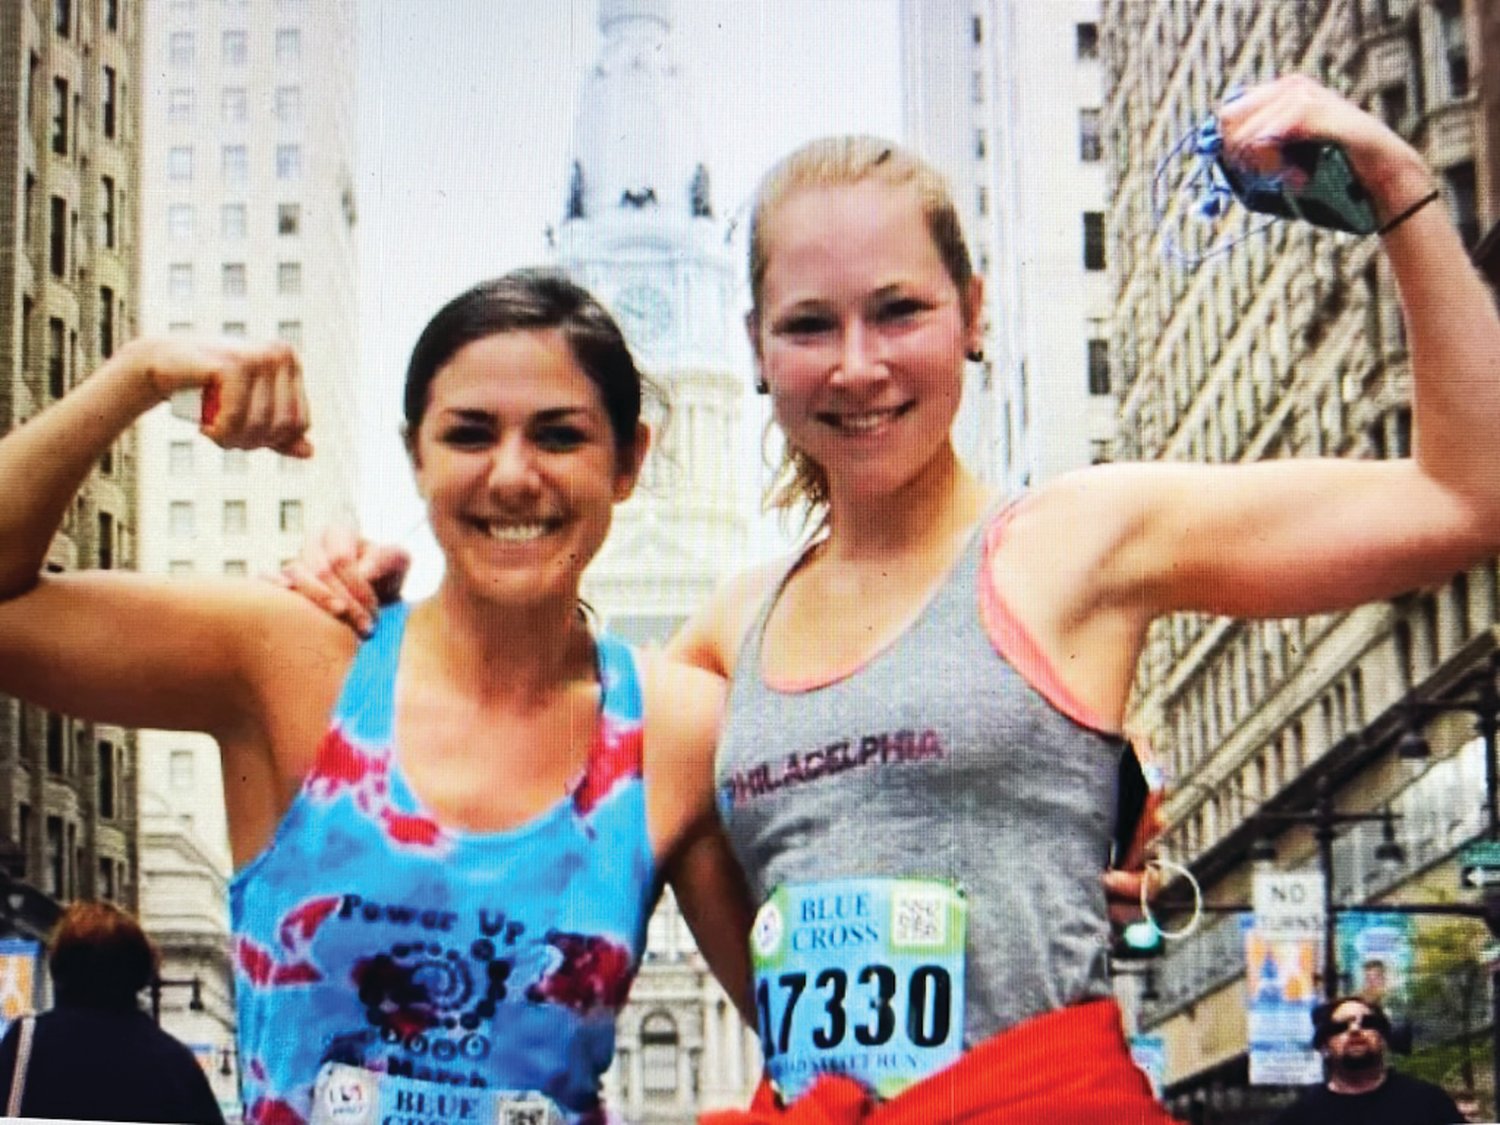 Runners travel from far and wide to compete in Philadelphia’s most popular race, the Broad Street Run.